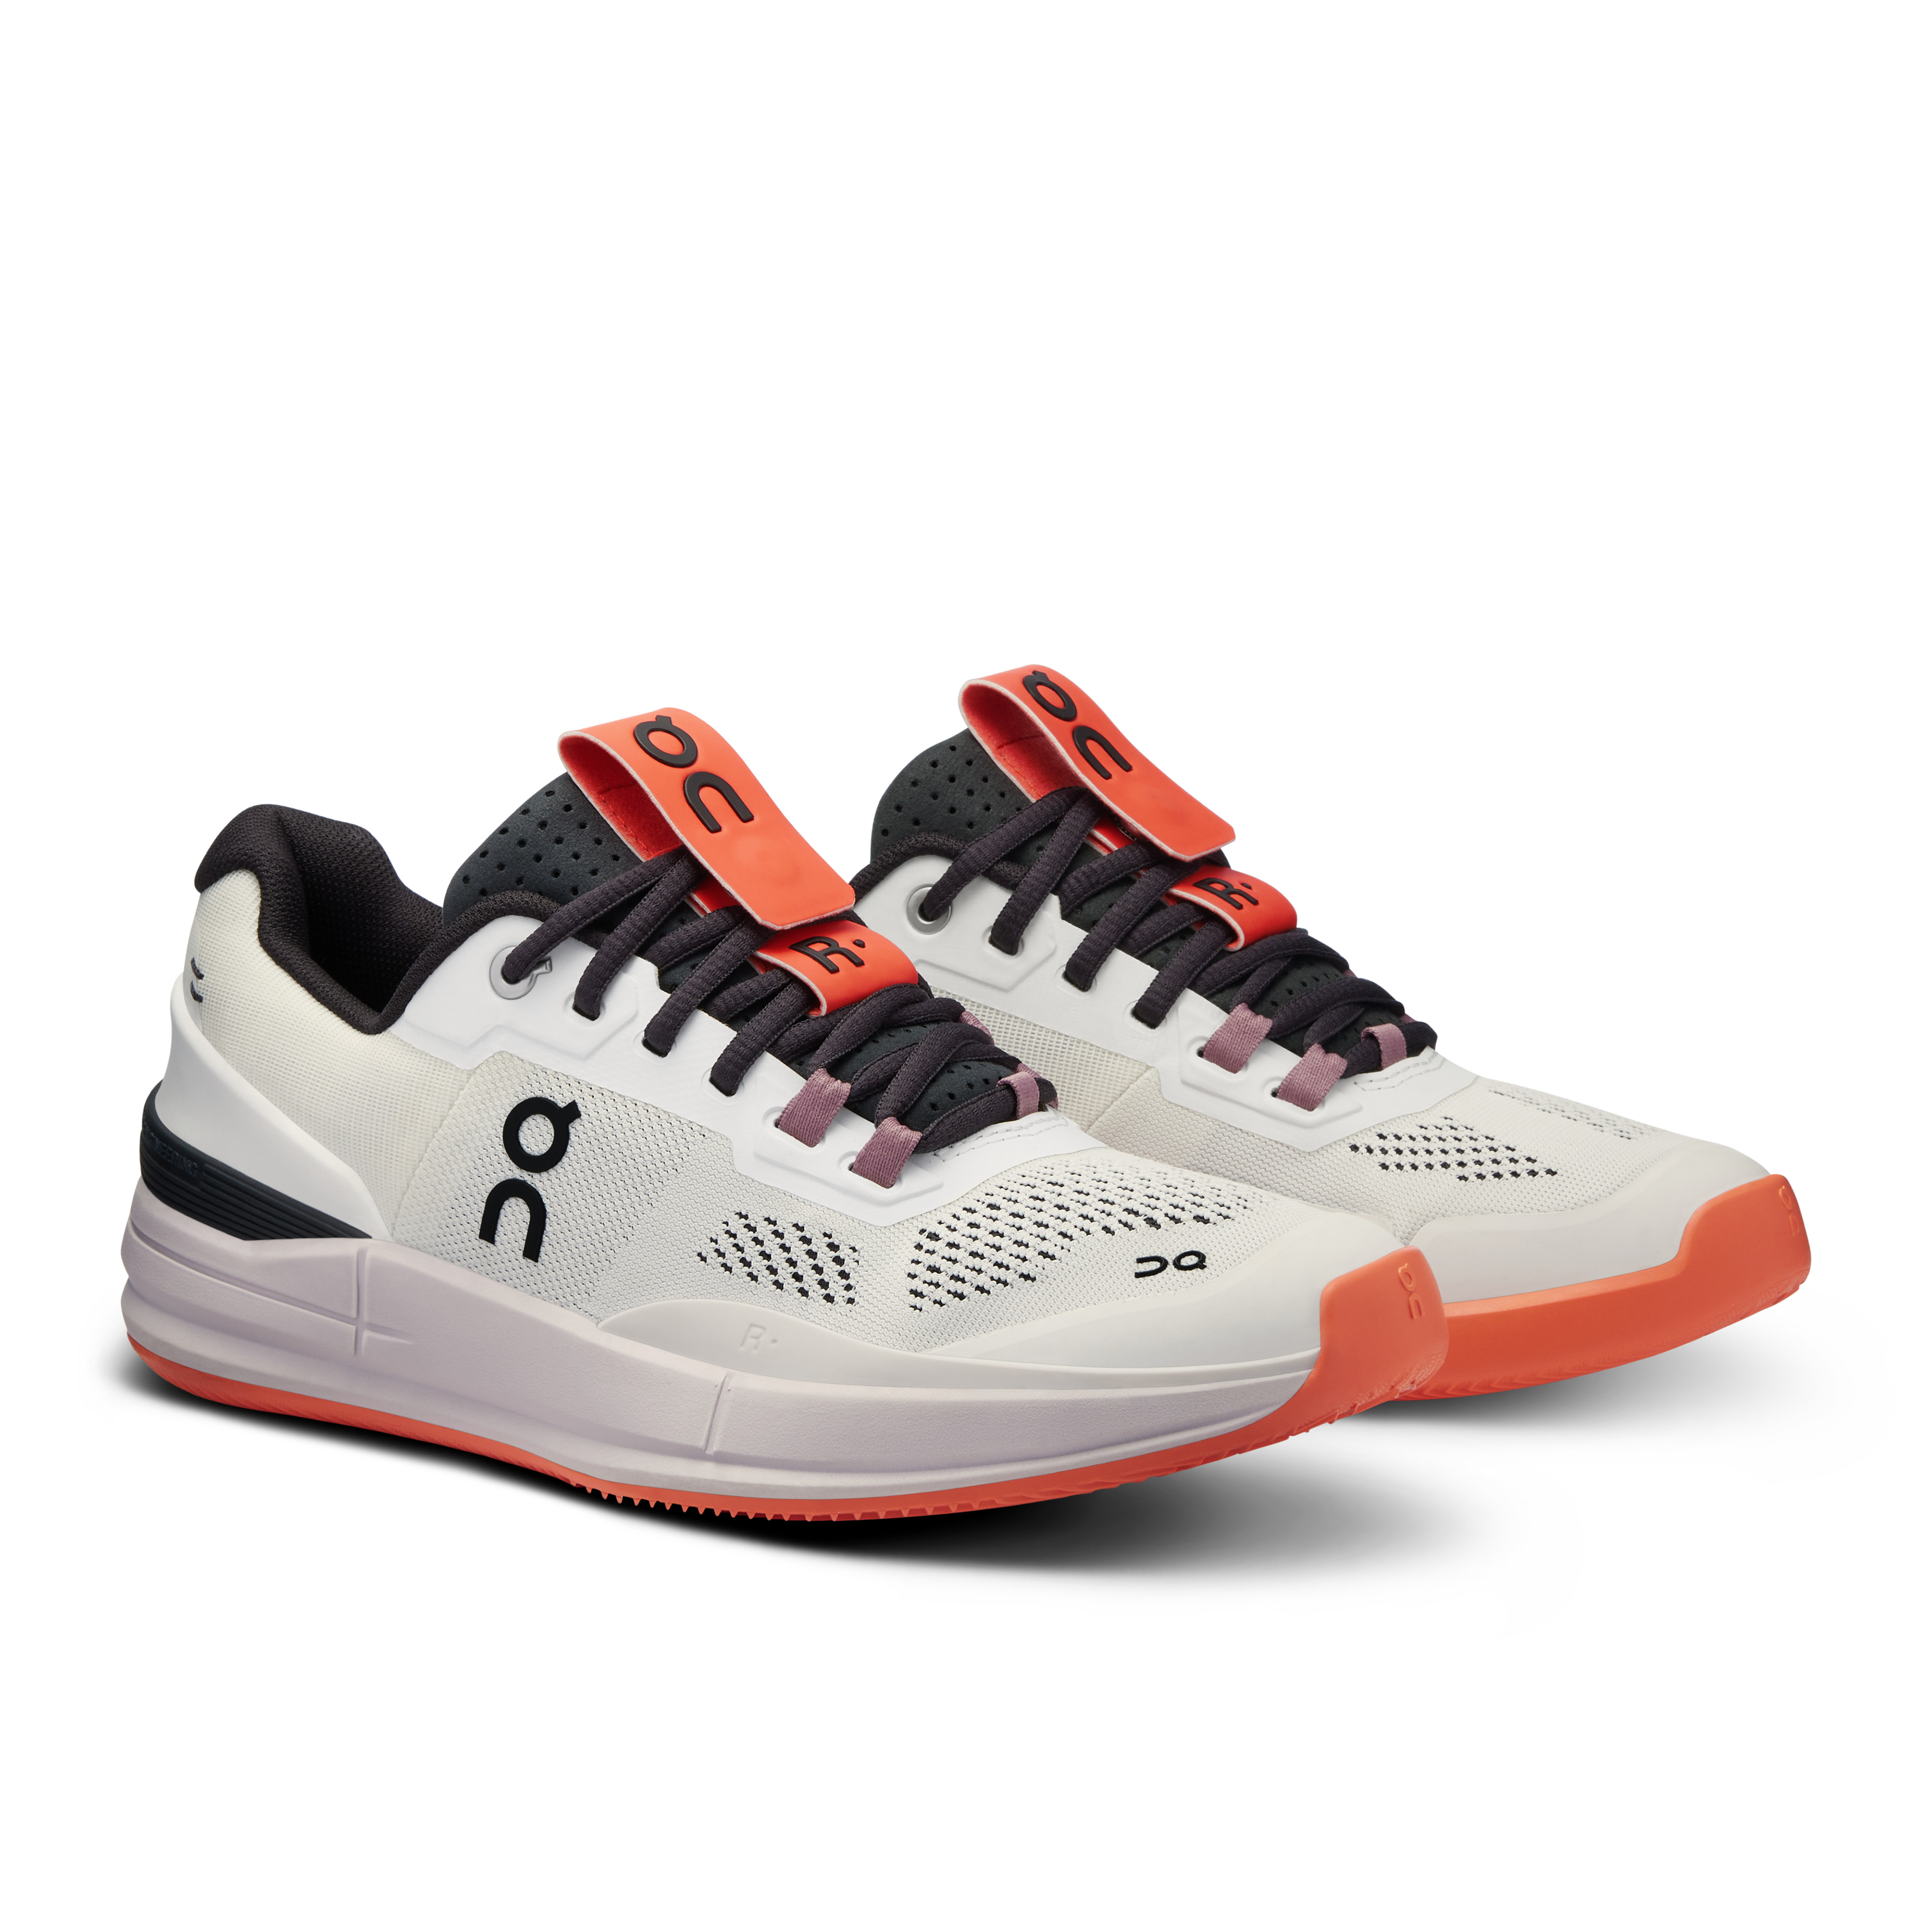 THE ROGER Pro Clay - 6